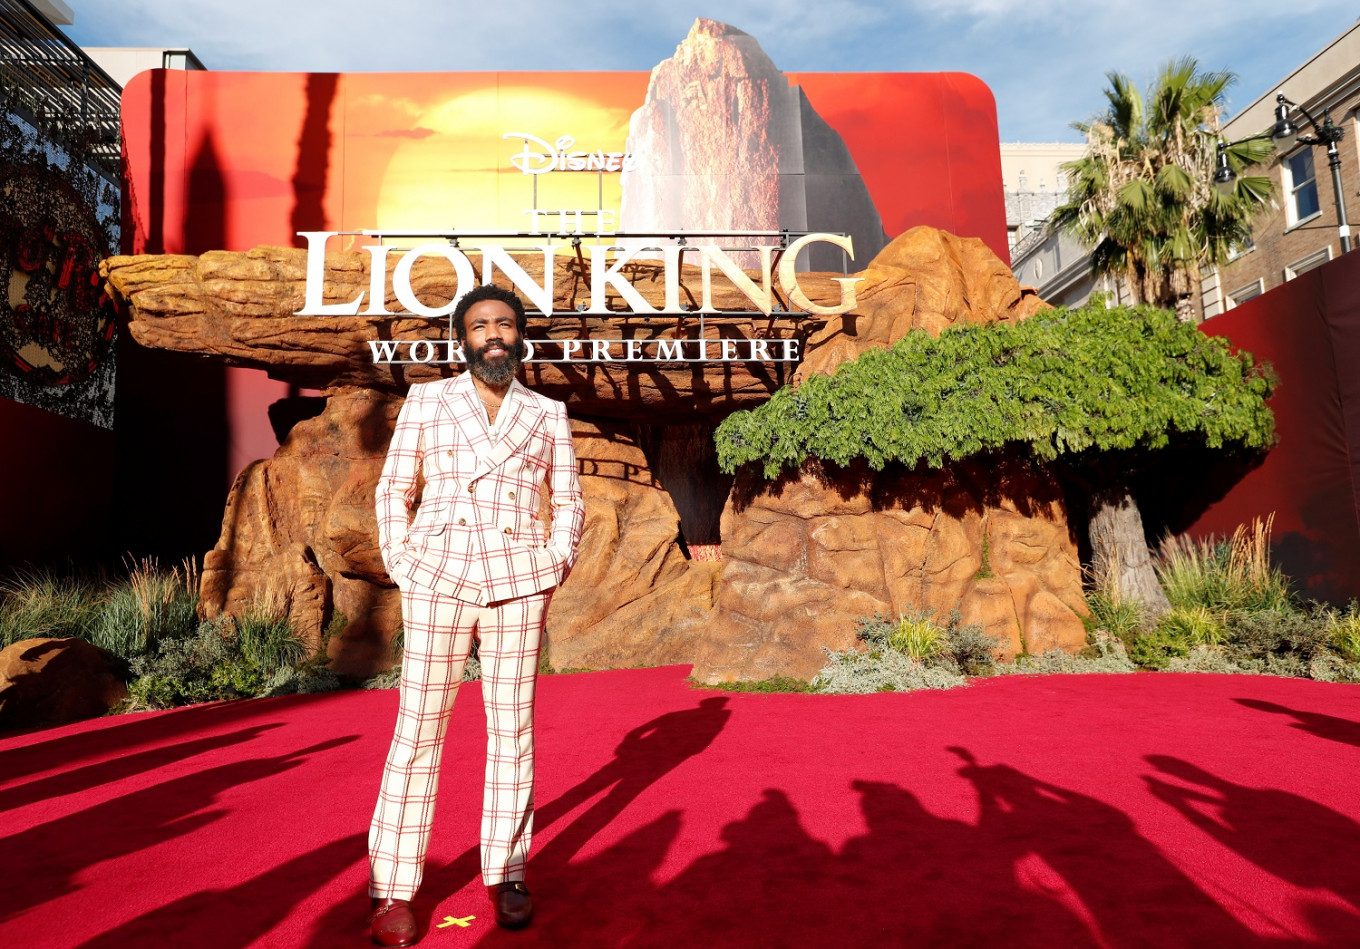 Cast member Donald Glover poses during the World premiere of The Lion King in Los Angeles, California, U.S., July 9. / Net